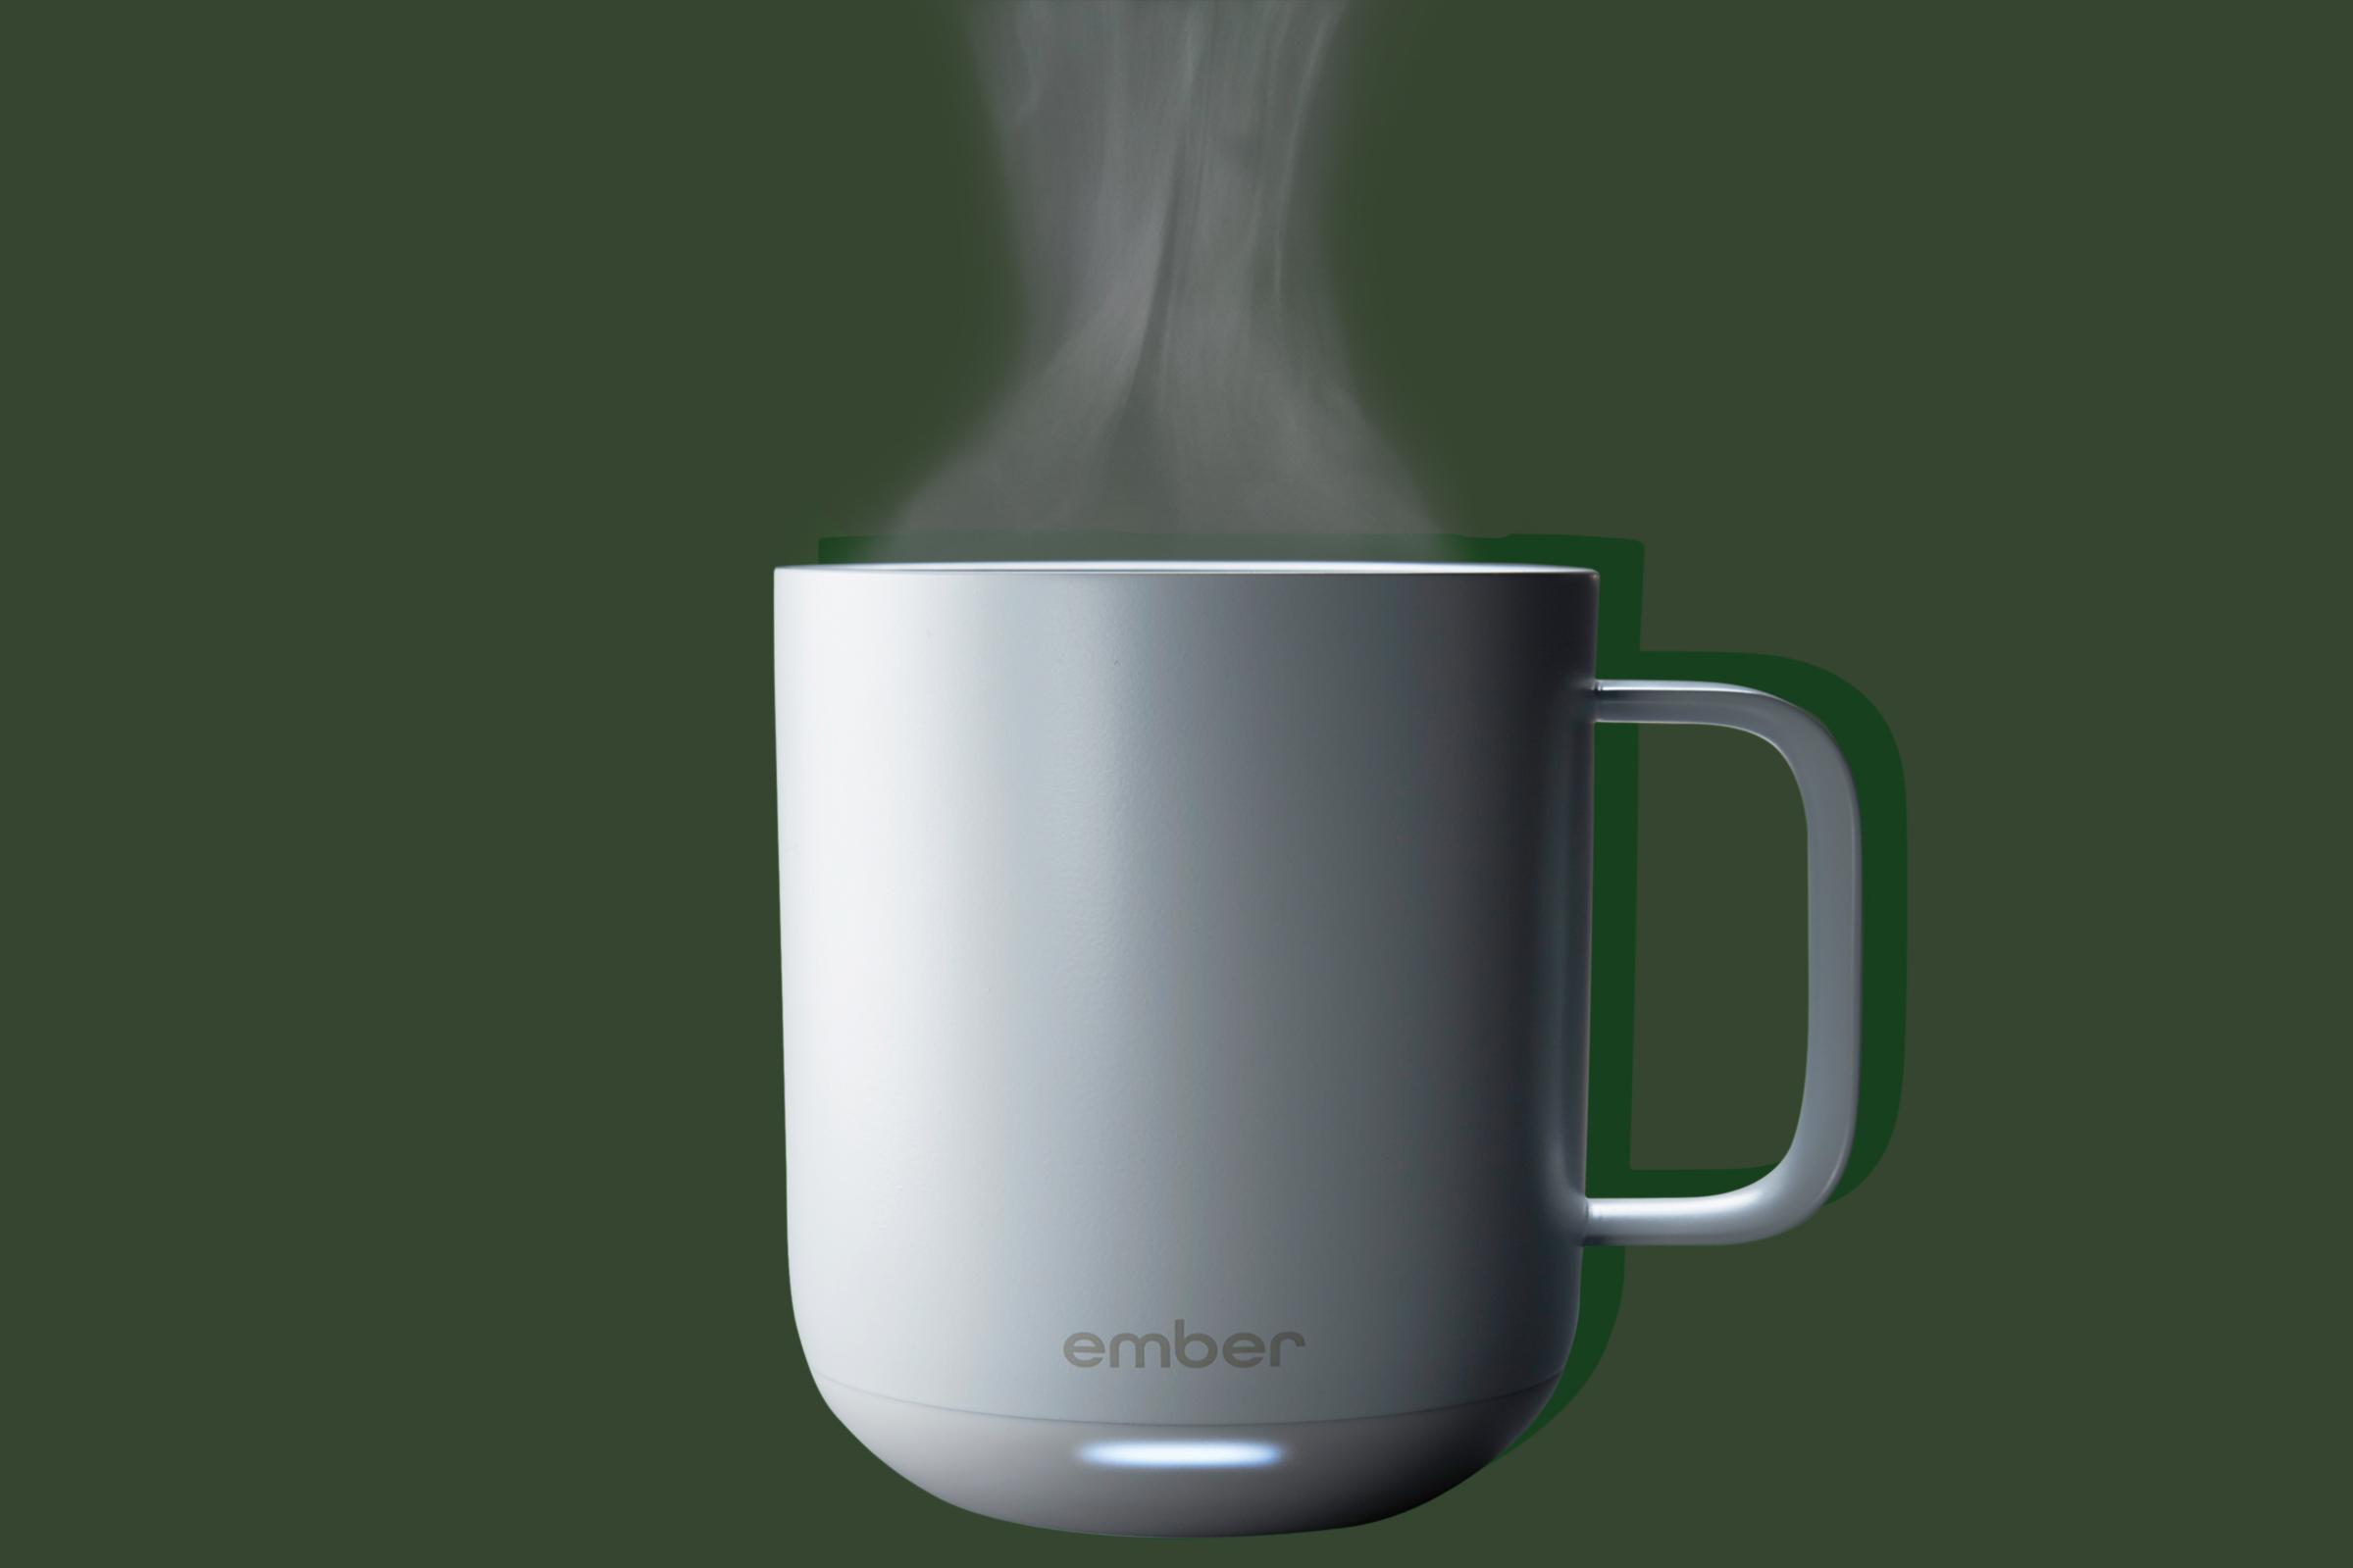 The Ember mug is one of the best inventions of 2017